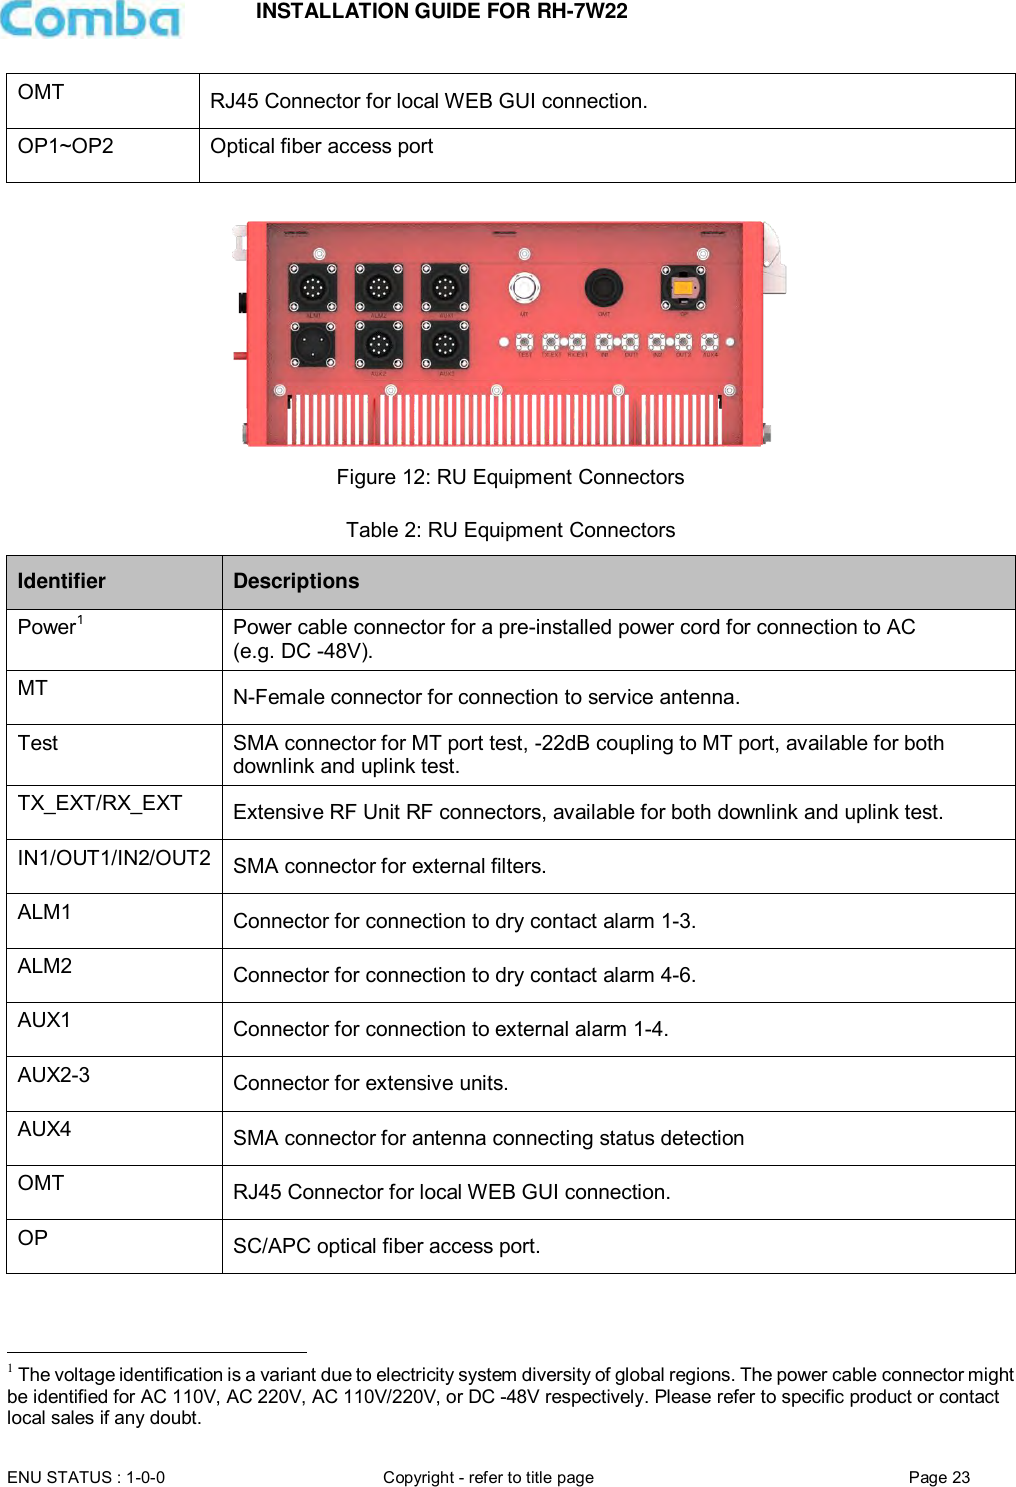 INSTALLATION GUIDE FOR RH-7W22  ENU STATUS : 1-0-0 Copyright - refer to title page Page 23     OMT RJ45 Connector for local WEB GUI connection. OP1~OP2 Optical fiber access port   Figure 12: RU Equipment Connectors  Table 2: RU Equipment Connectors Identifier Descriptions Power1 Power cable connector for a pre-installed power cord for connection to AC (e.g. DC -48V). MT N-Female connector for connection to service antenna.  Test SMA connector for MT port test, -22dB coupling to MT port, available for both downlink and uplink test.  TX_EXT/RX_EXT Extensive RF Unit RF connectors, available for both downlink and uplink test. IN1/OUT1/IN2/OUT2 SMA connector for external filters. ALM1 Connector for connection to dry contact alarm 1-3. ALM2 Connector for connection to dry contact alarm 4-6. AUX1 Connector for connection to external alarm 1-4. AUX2-3 Connector for extensive units. AUX4 SMA connector for antenna connecting status detection OMT RJ45 Connector for local WEB GUI connection. OP SC/APC optical fiber access port.                                                   1 The voltage identification is a variant due to electricity system diversity of global regions. The power cable connector might be identified for AC 110V, AC 220V, AC 110V/220V, or DC -48V respectively. Please refer to specific product or contact local sales if any doubt. 